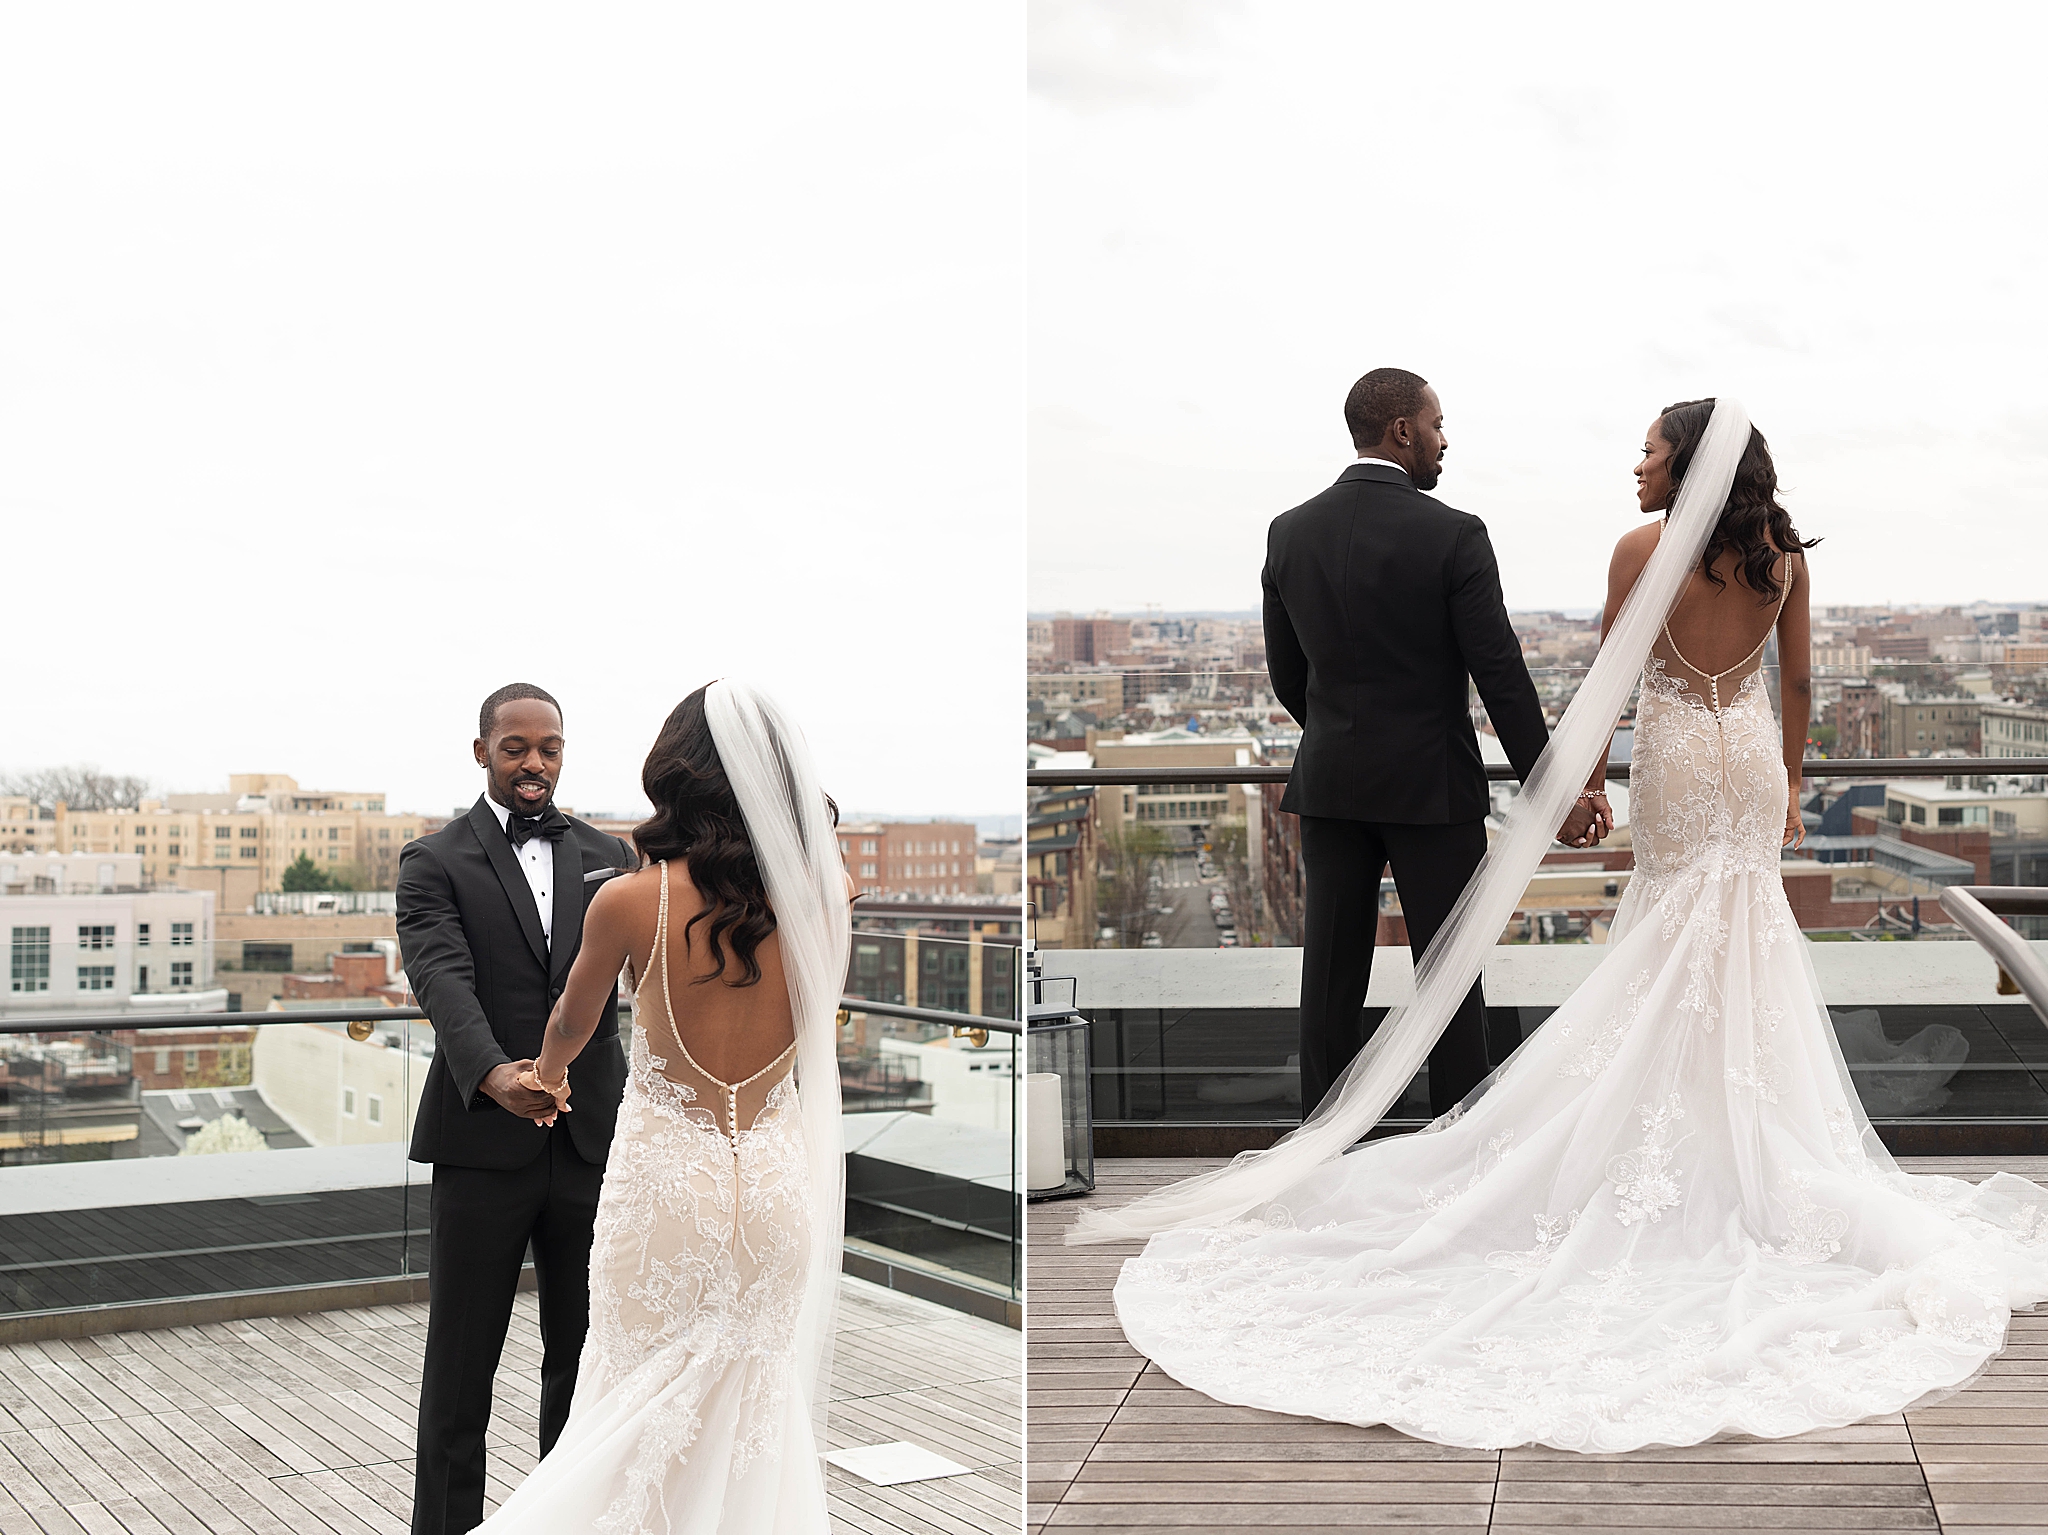 DC newlyweds pose on rooftop in LINE DC